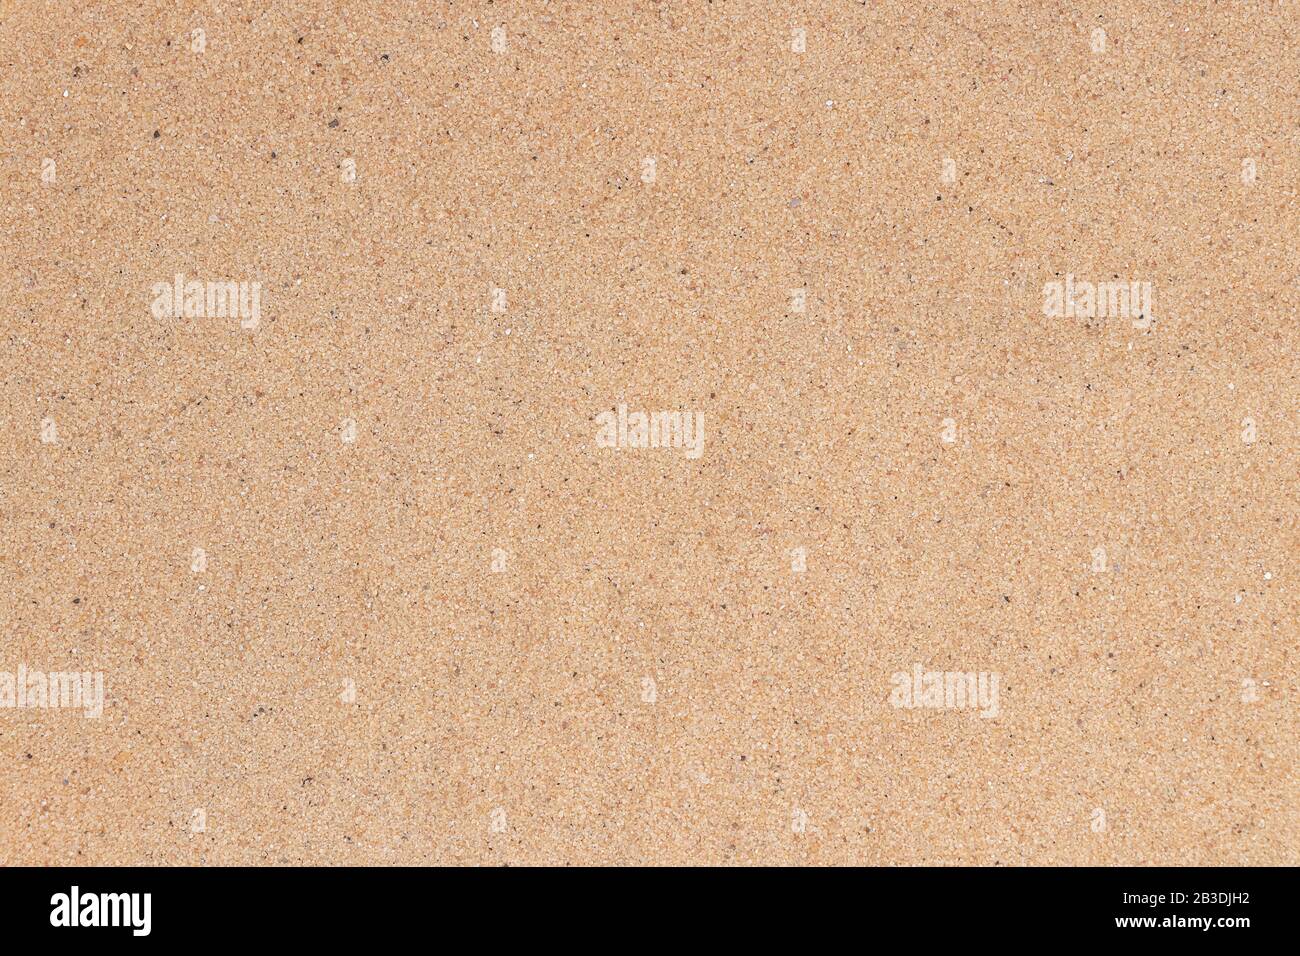 Sand of the beach background. Top view Stock Photo